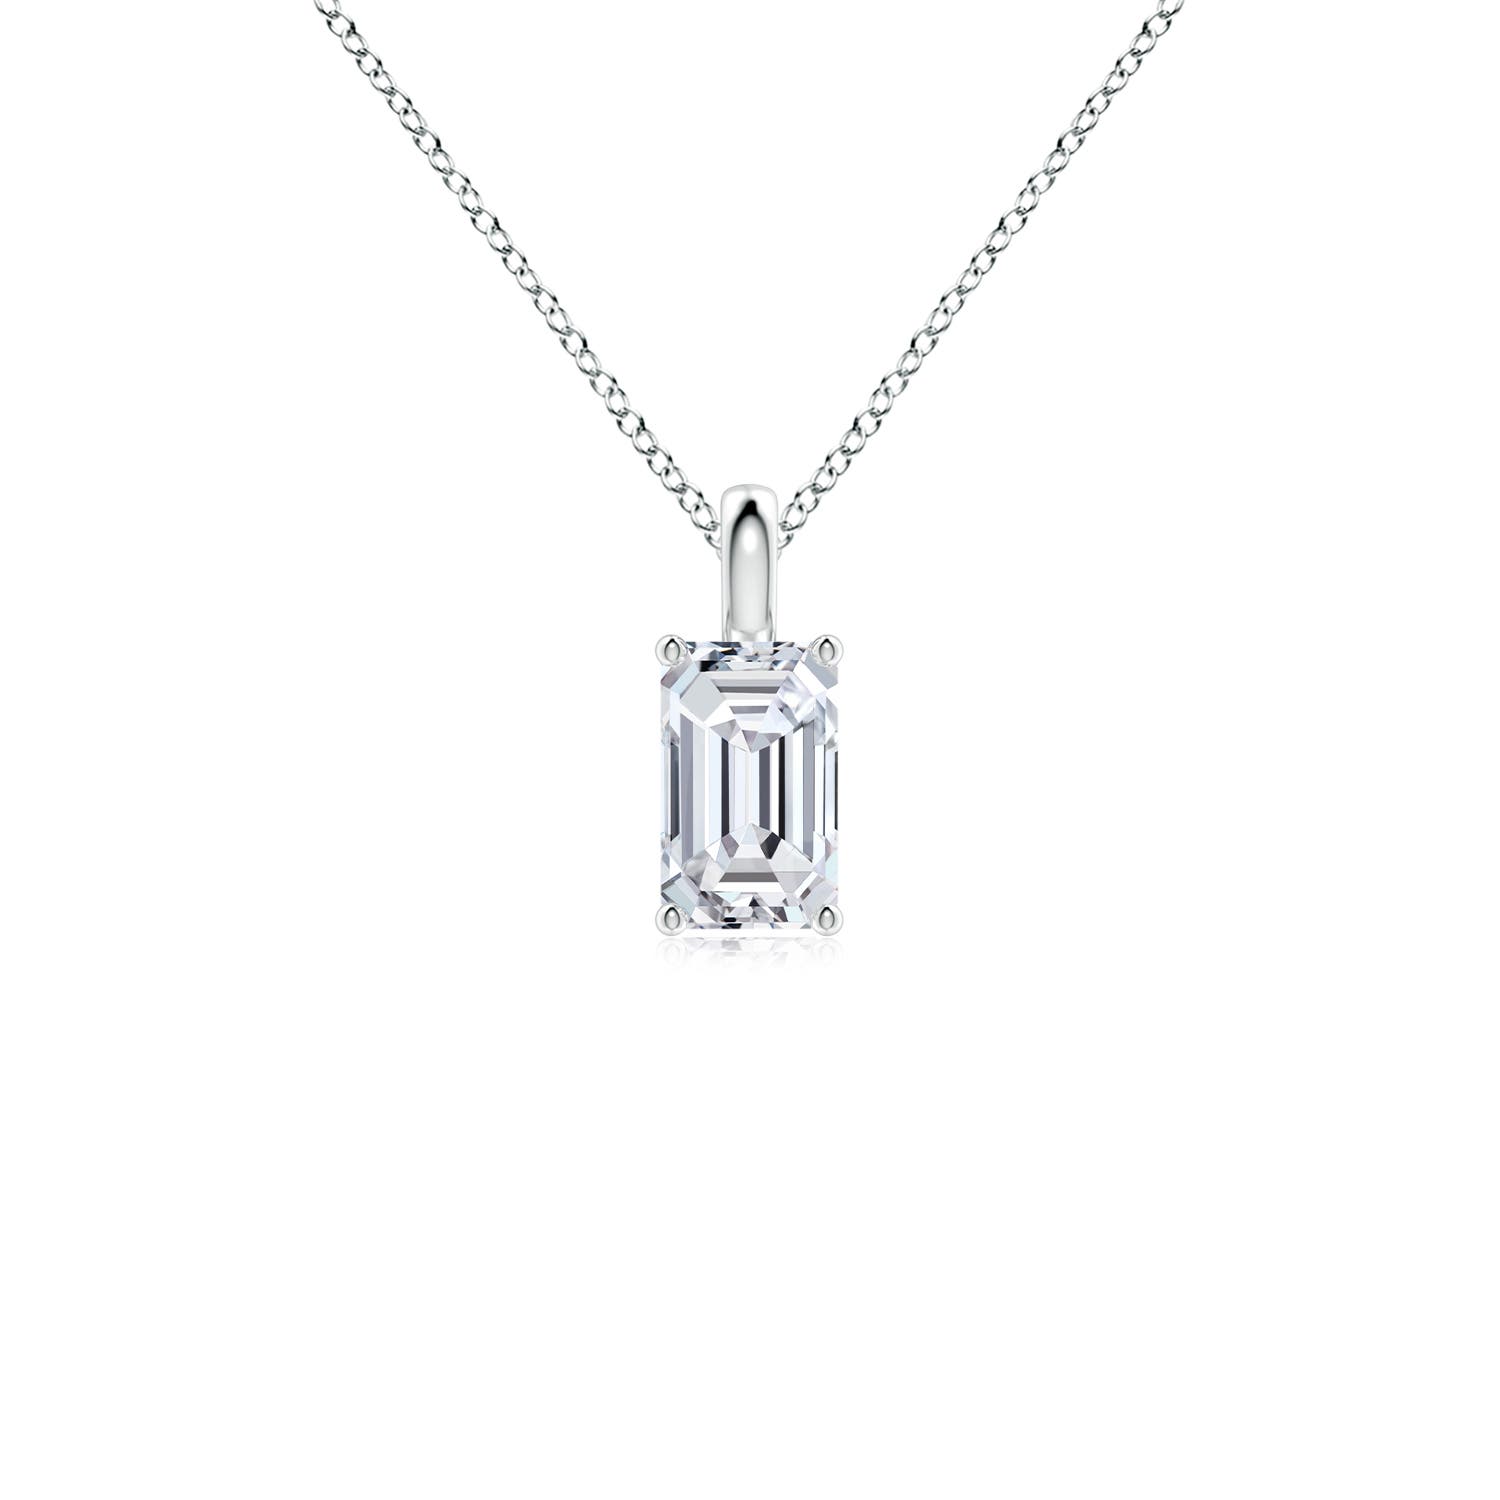 H, SI2 / 0.7 CT / 14 KT White Gold